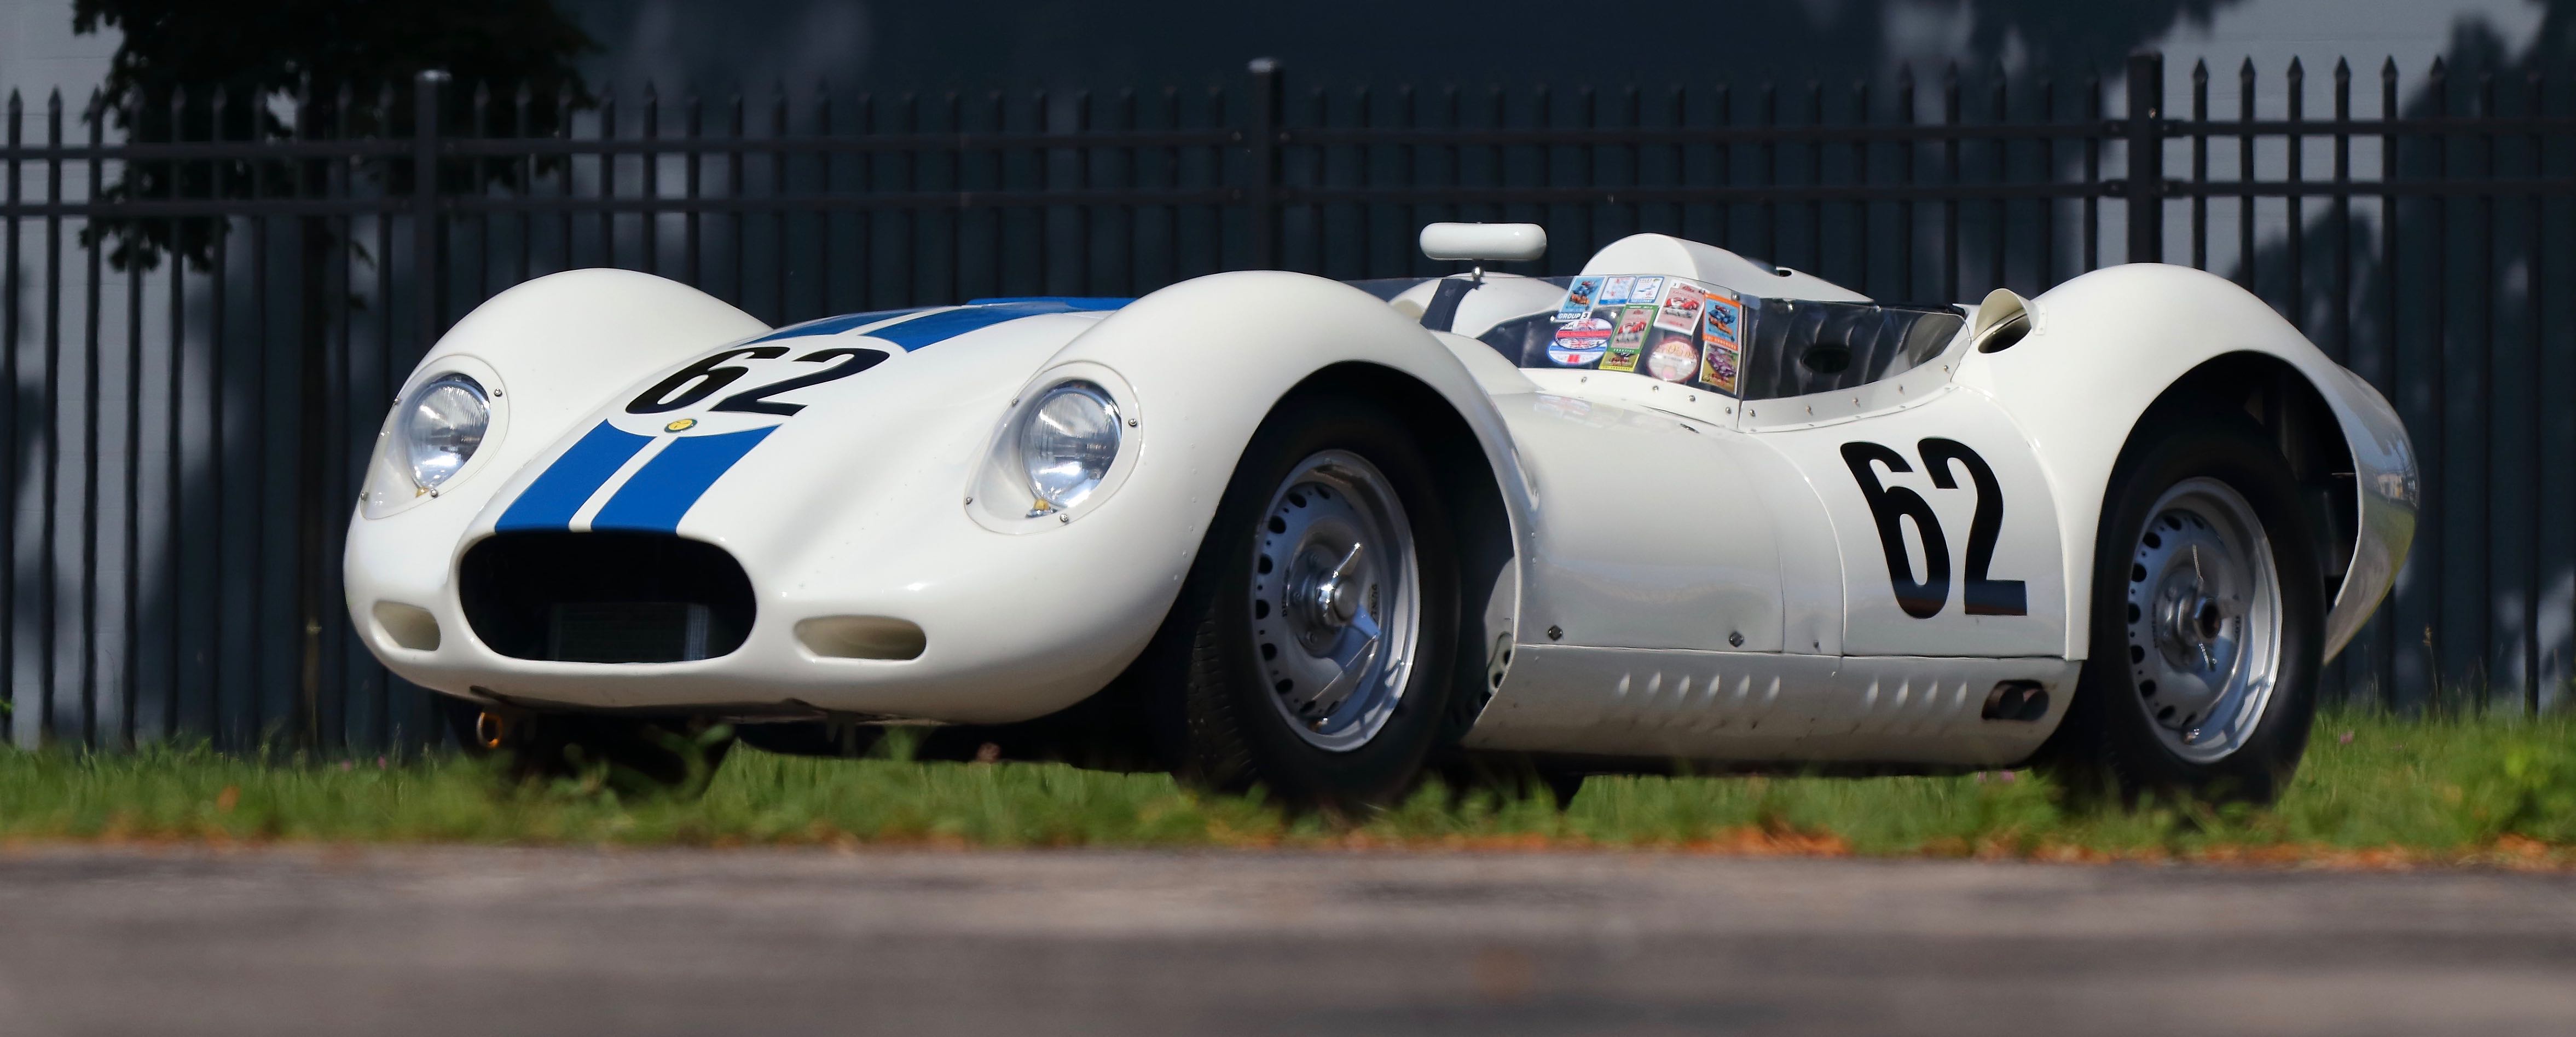 1958 Lister-Jaguar 'Knobbly' was owned and raced by Briggs Cunningham | Mecum Auctions photos